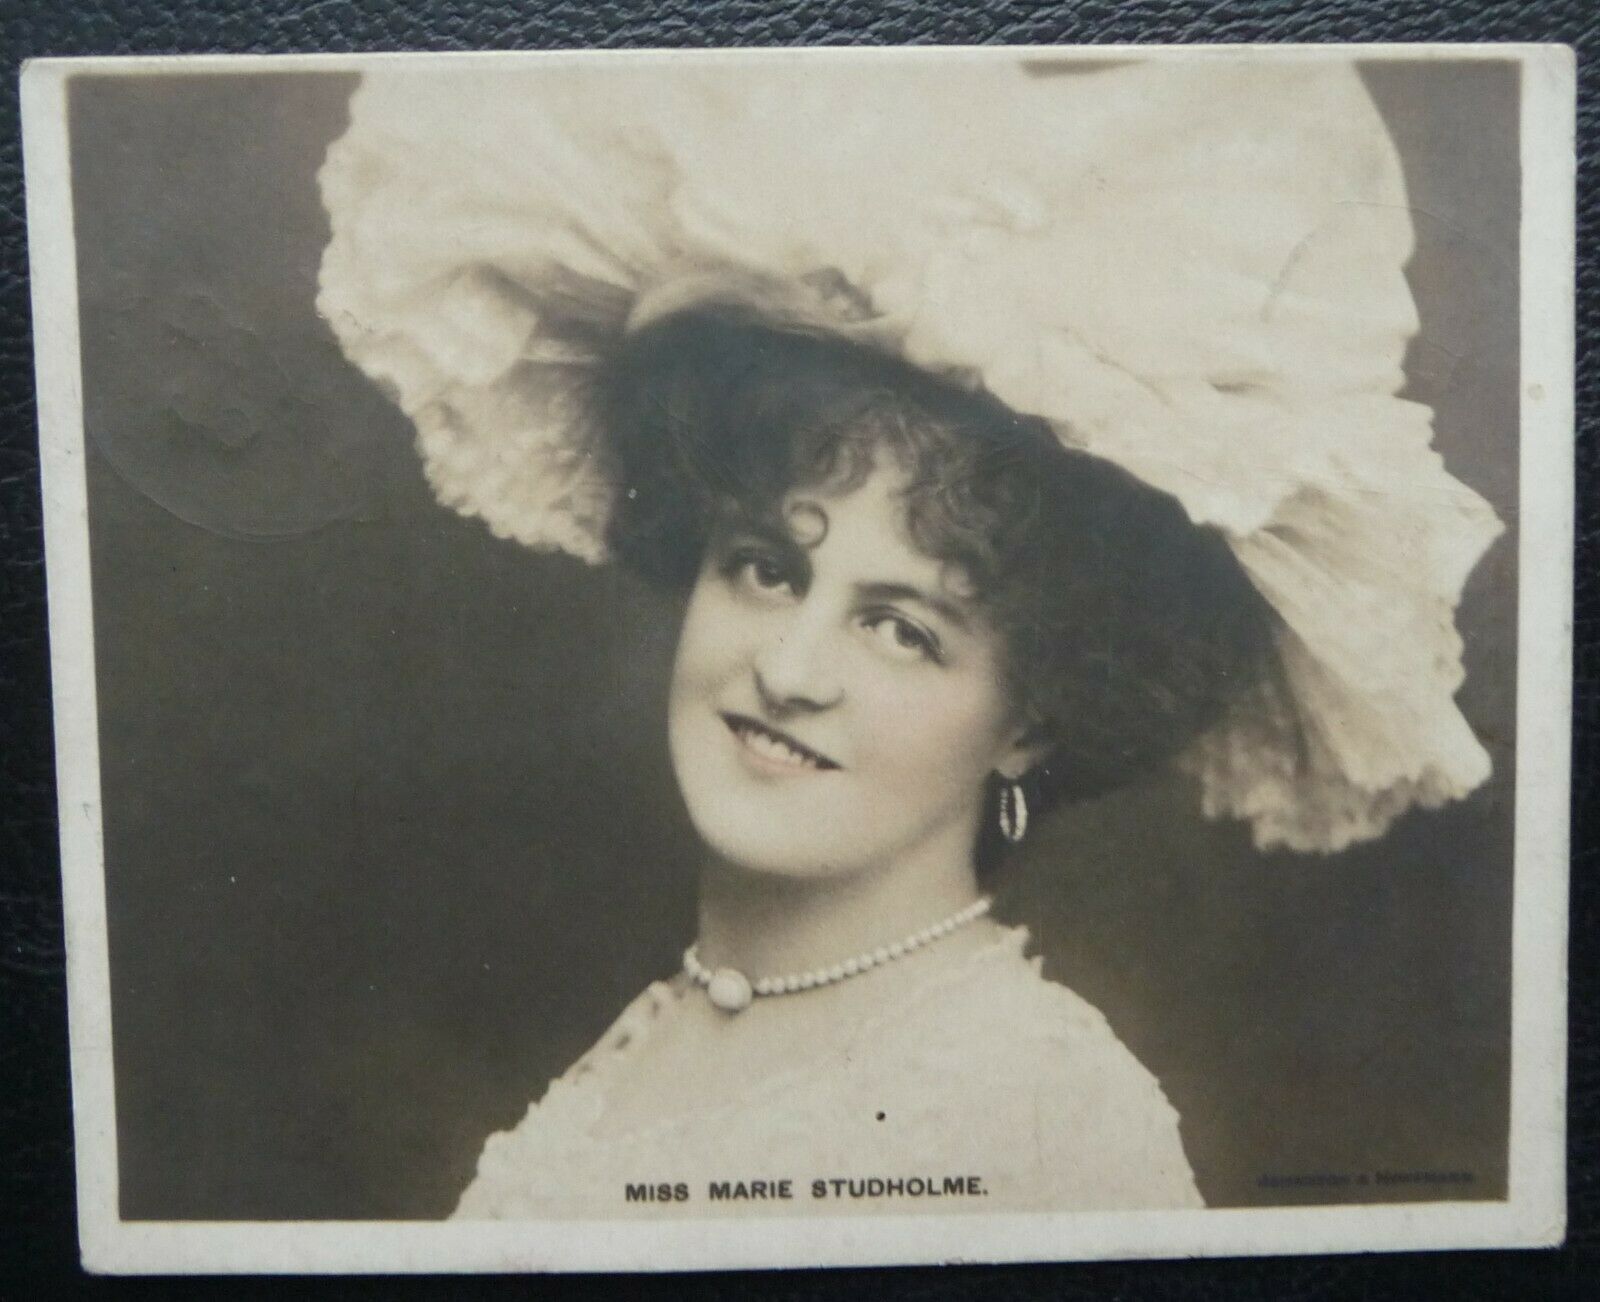 House Clearance - EDWARDIAN ACTRESS MISS MARIE STUDHOLME MIDGET POSTCARD POSTED NORTH SHIELDS 1905